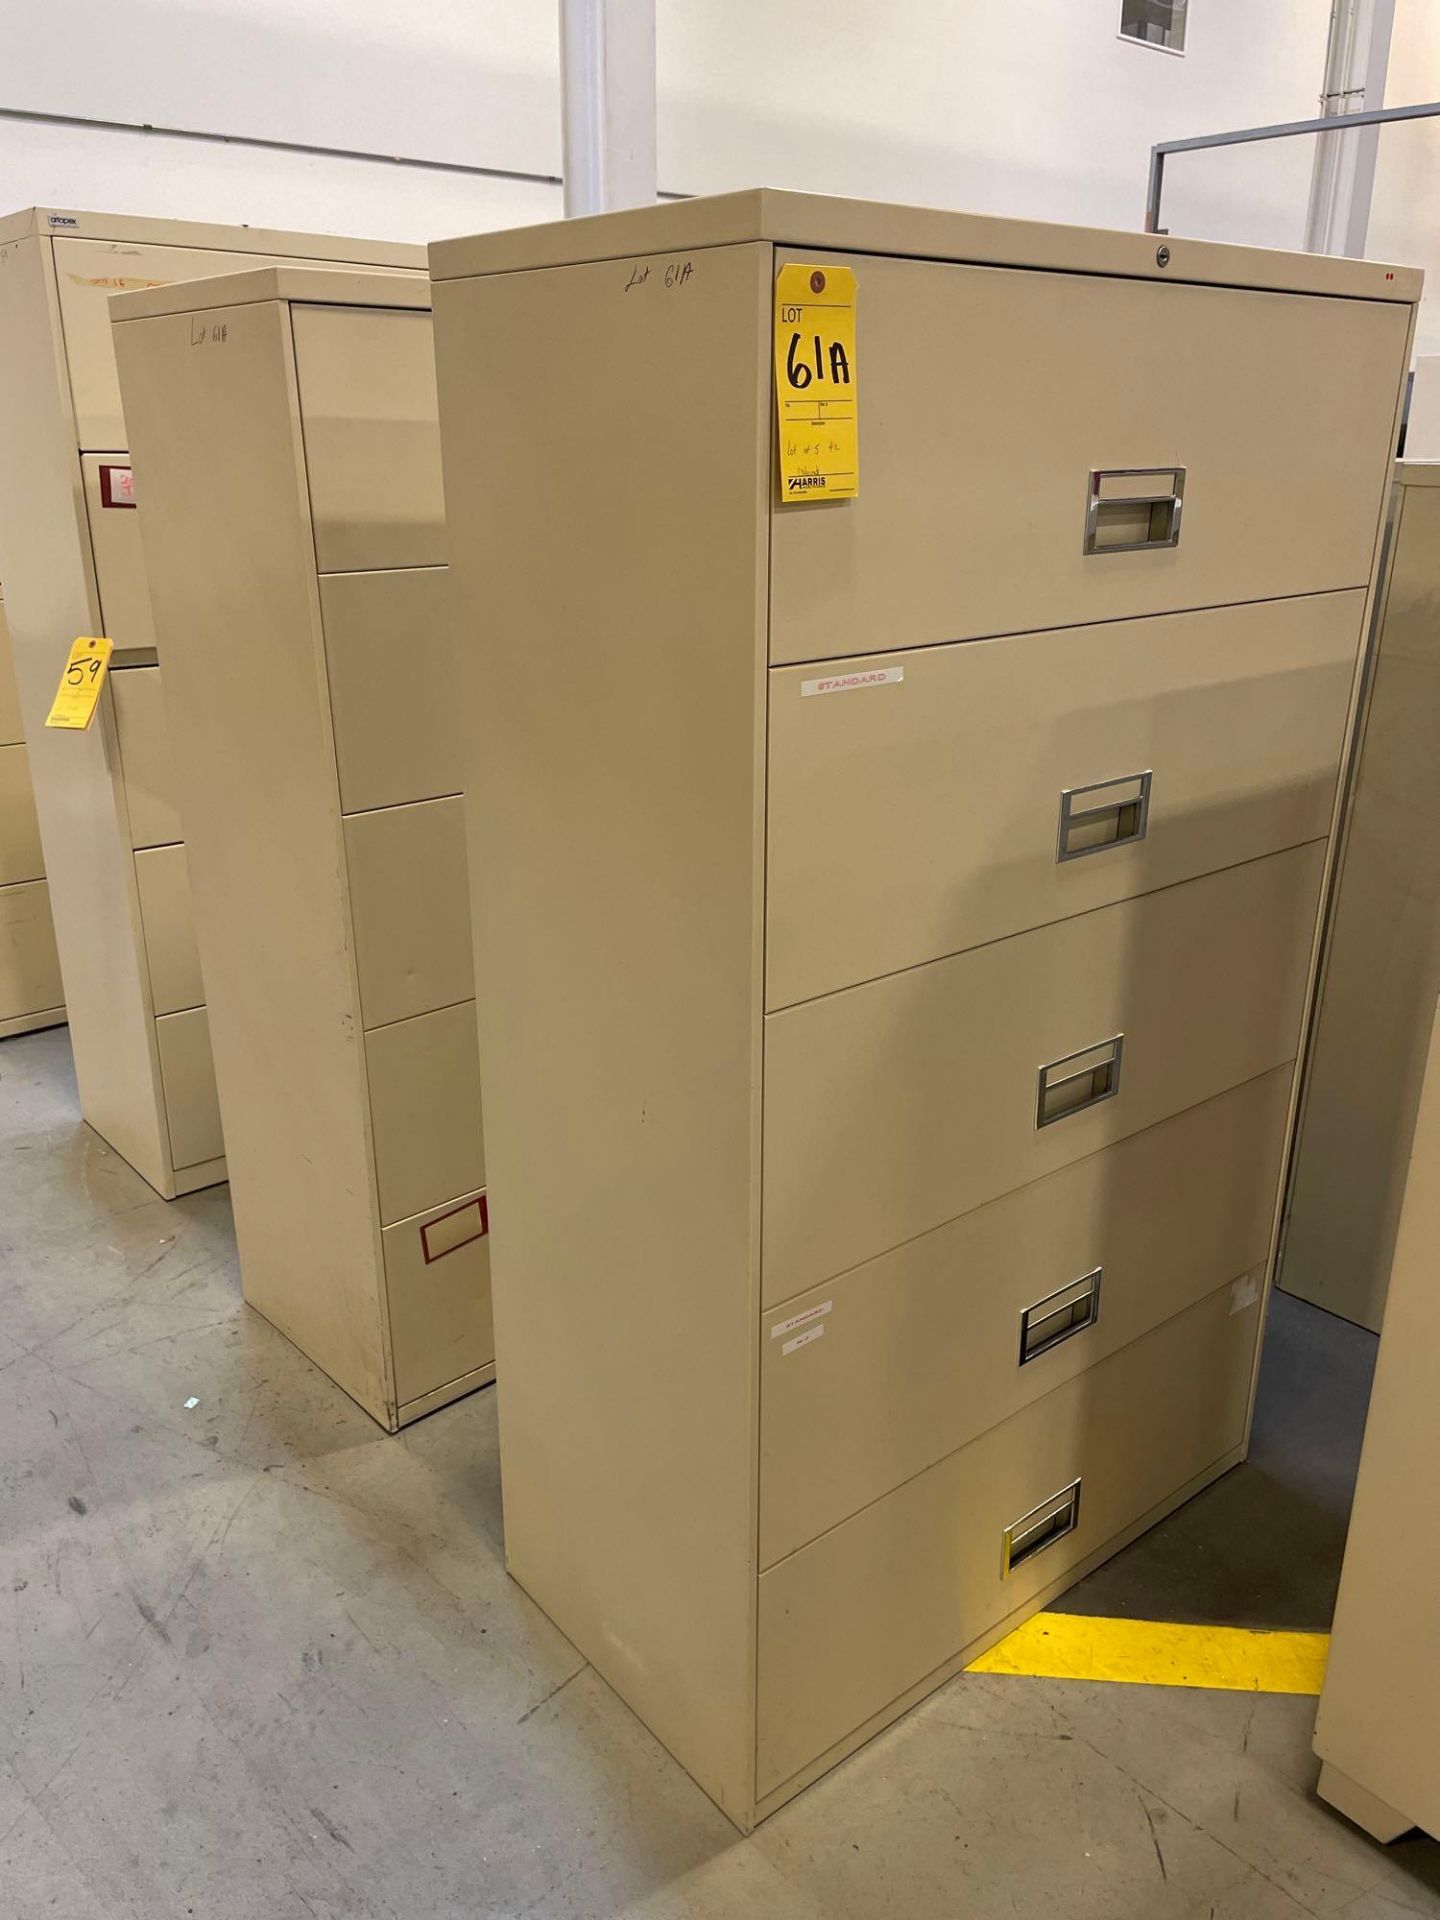 Lot of 5 File Cabinets, 5 Drawer: (4) 36" X 18" X 60", (1) 36" X 18" X 66" - Image 5 of 7